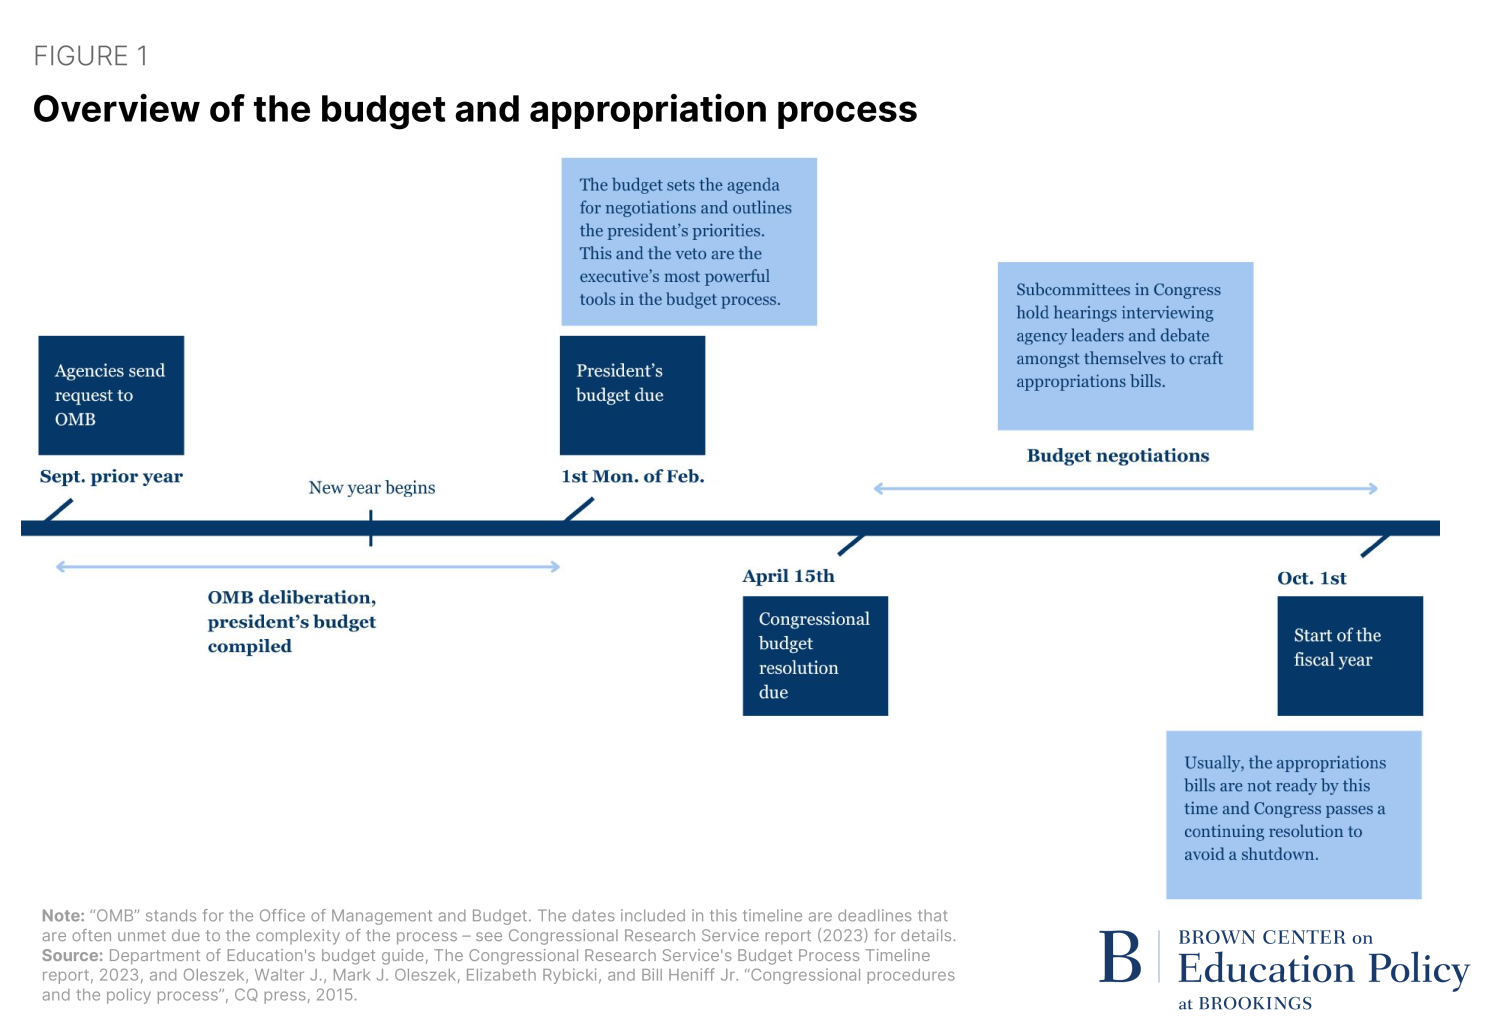 Figure depicting overview of the budget and appropriation process